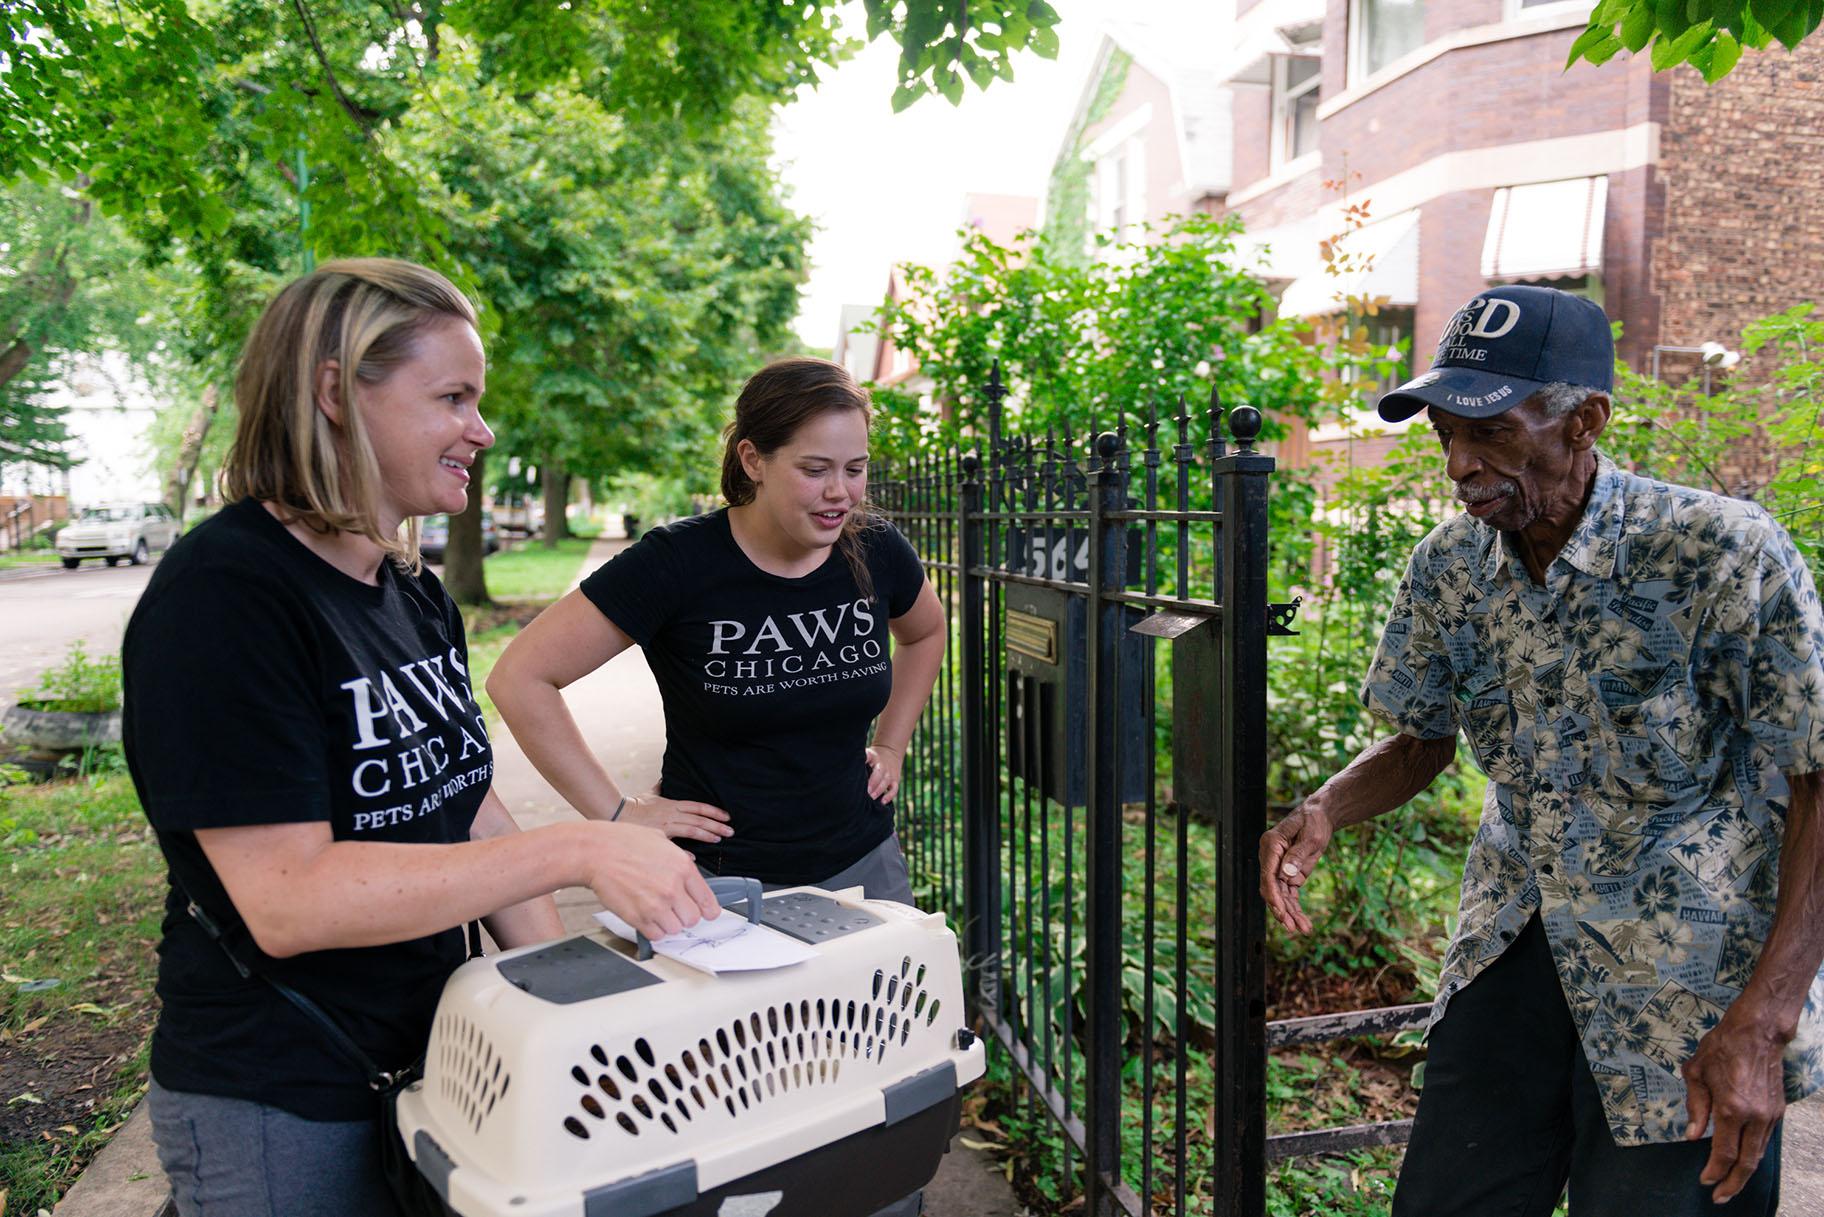 PAWS has provided services to 13,000 pets in Englewood since 2014. (Courtesy PAWS Chicago)